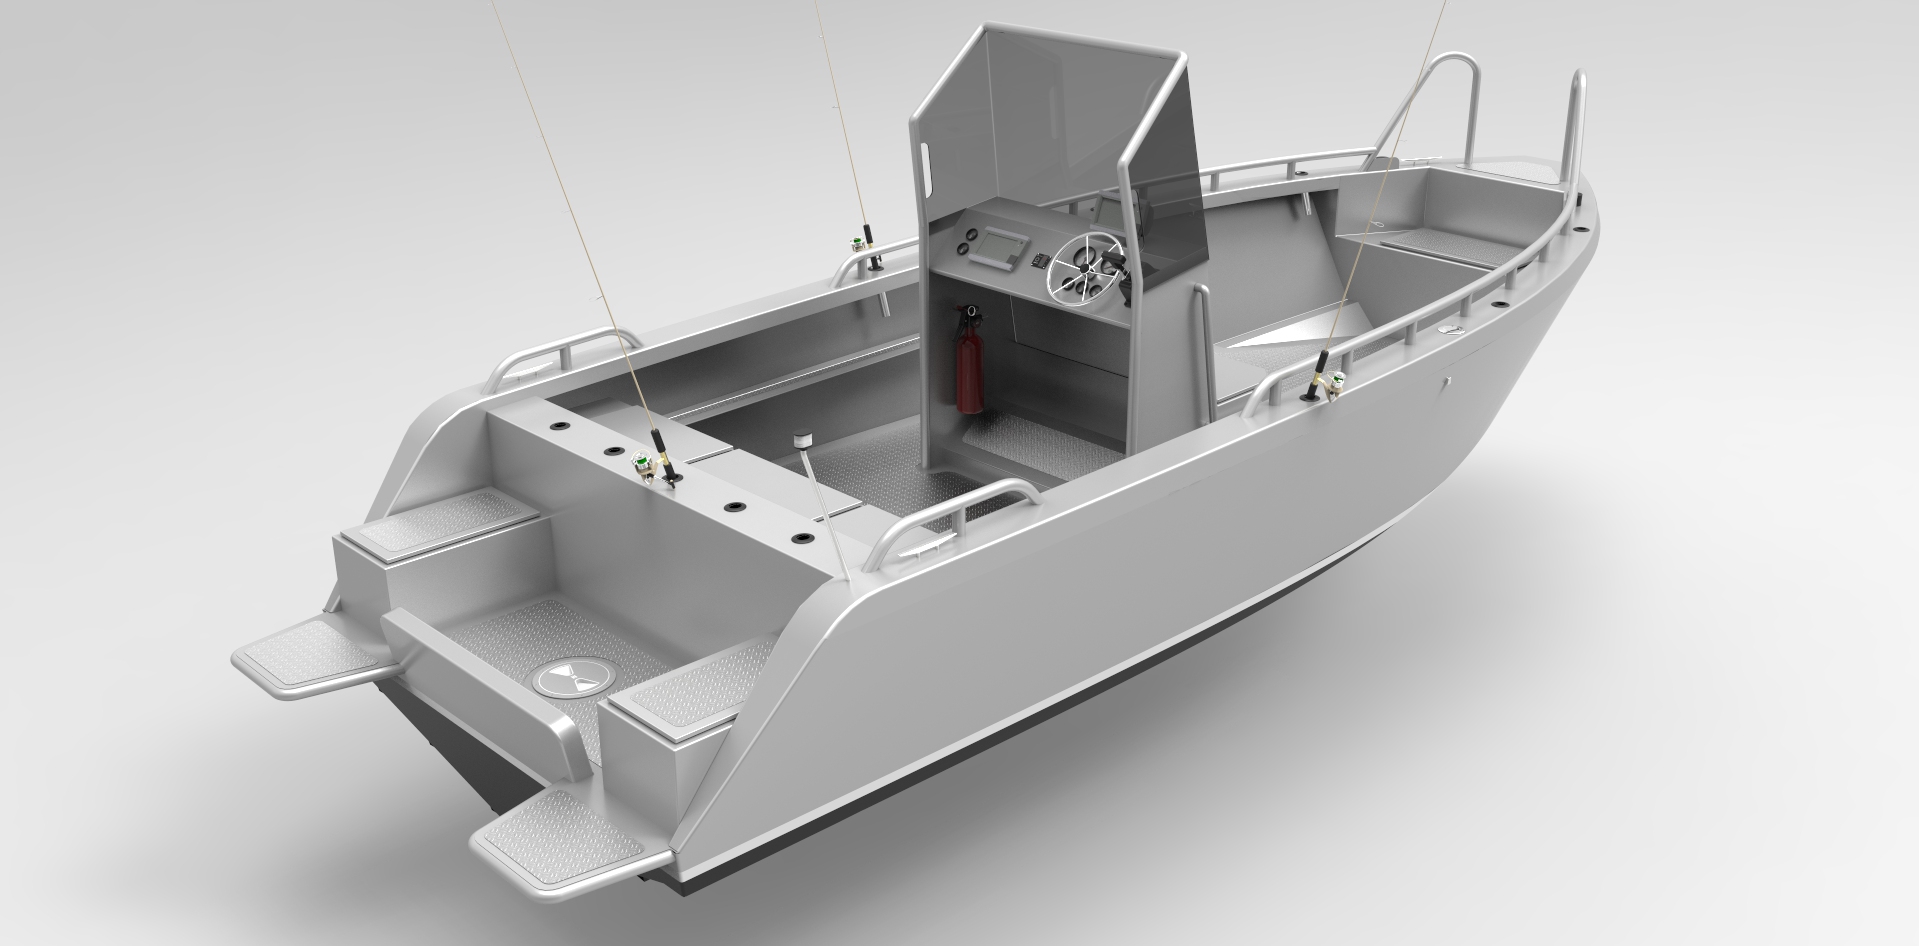 wooden boatbuilder releases center console kit option